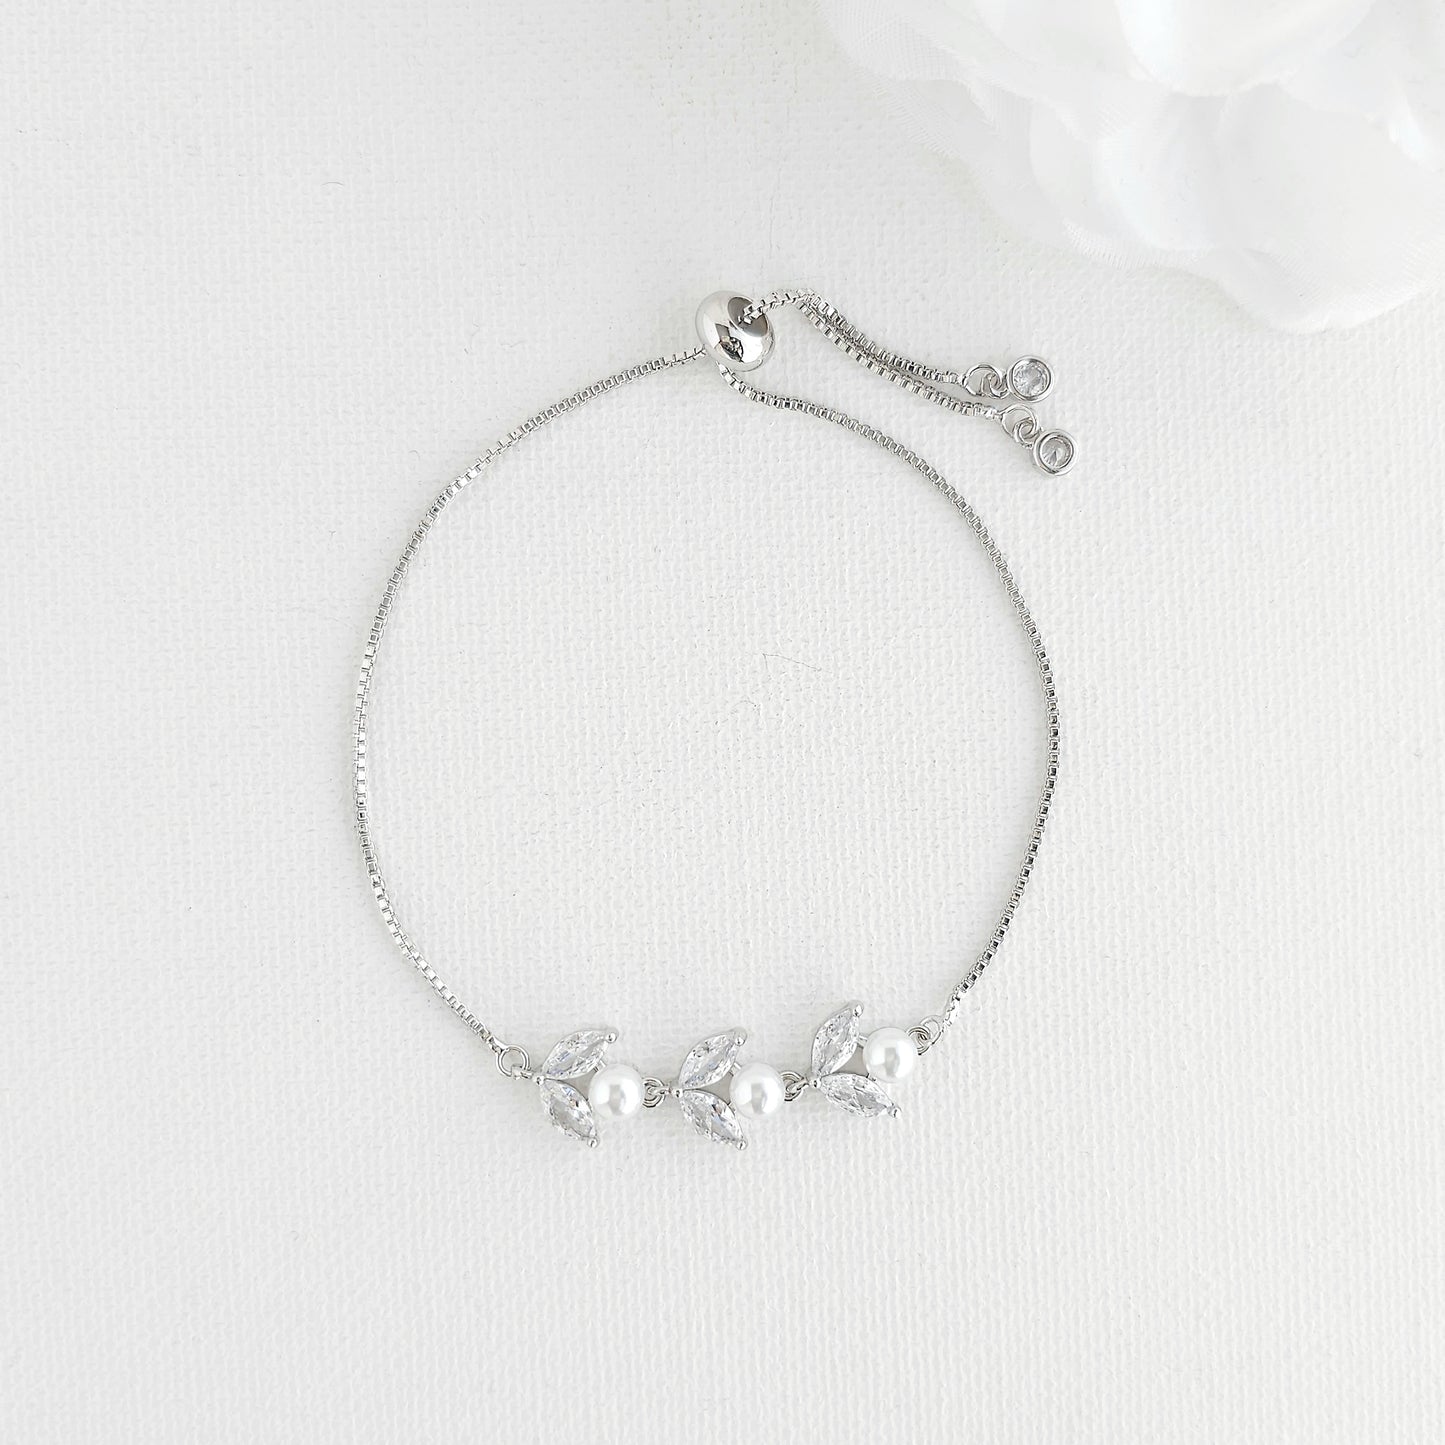 Dainty Rose Gold Bracelet for Brides and Bridemaids-Leila